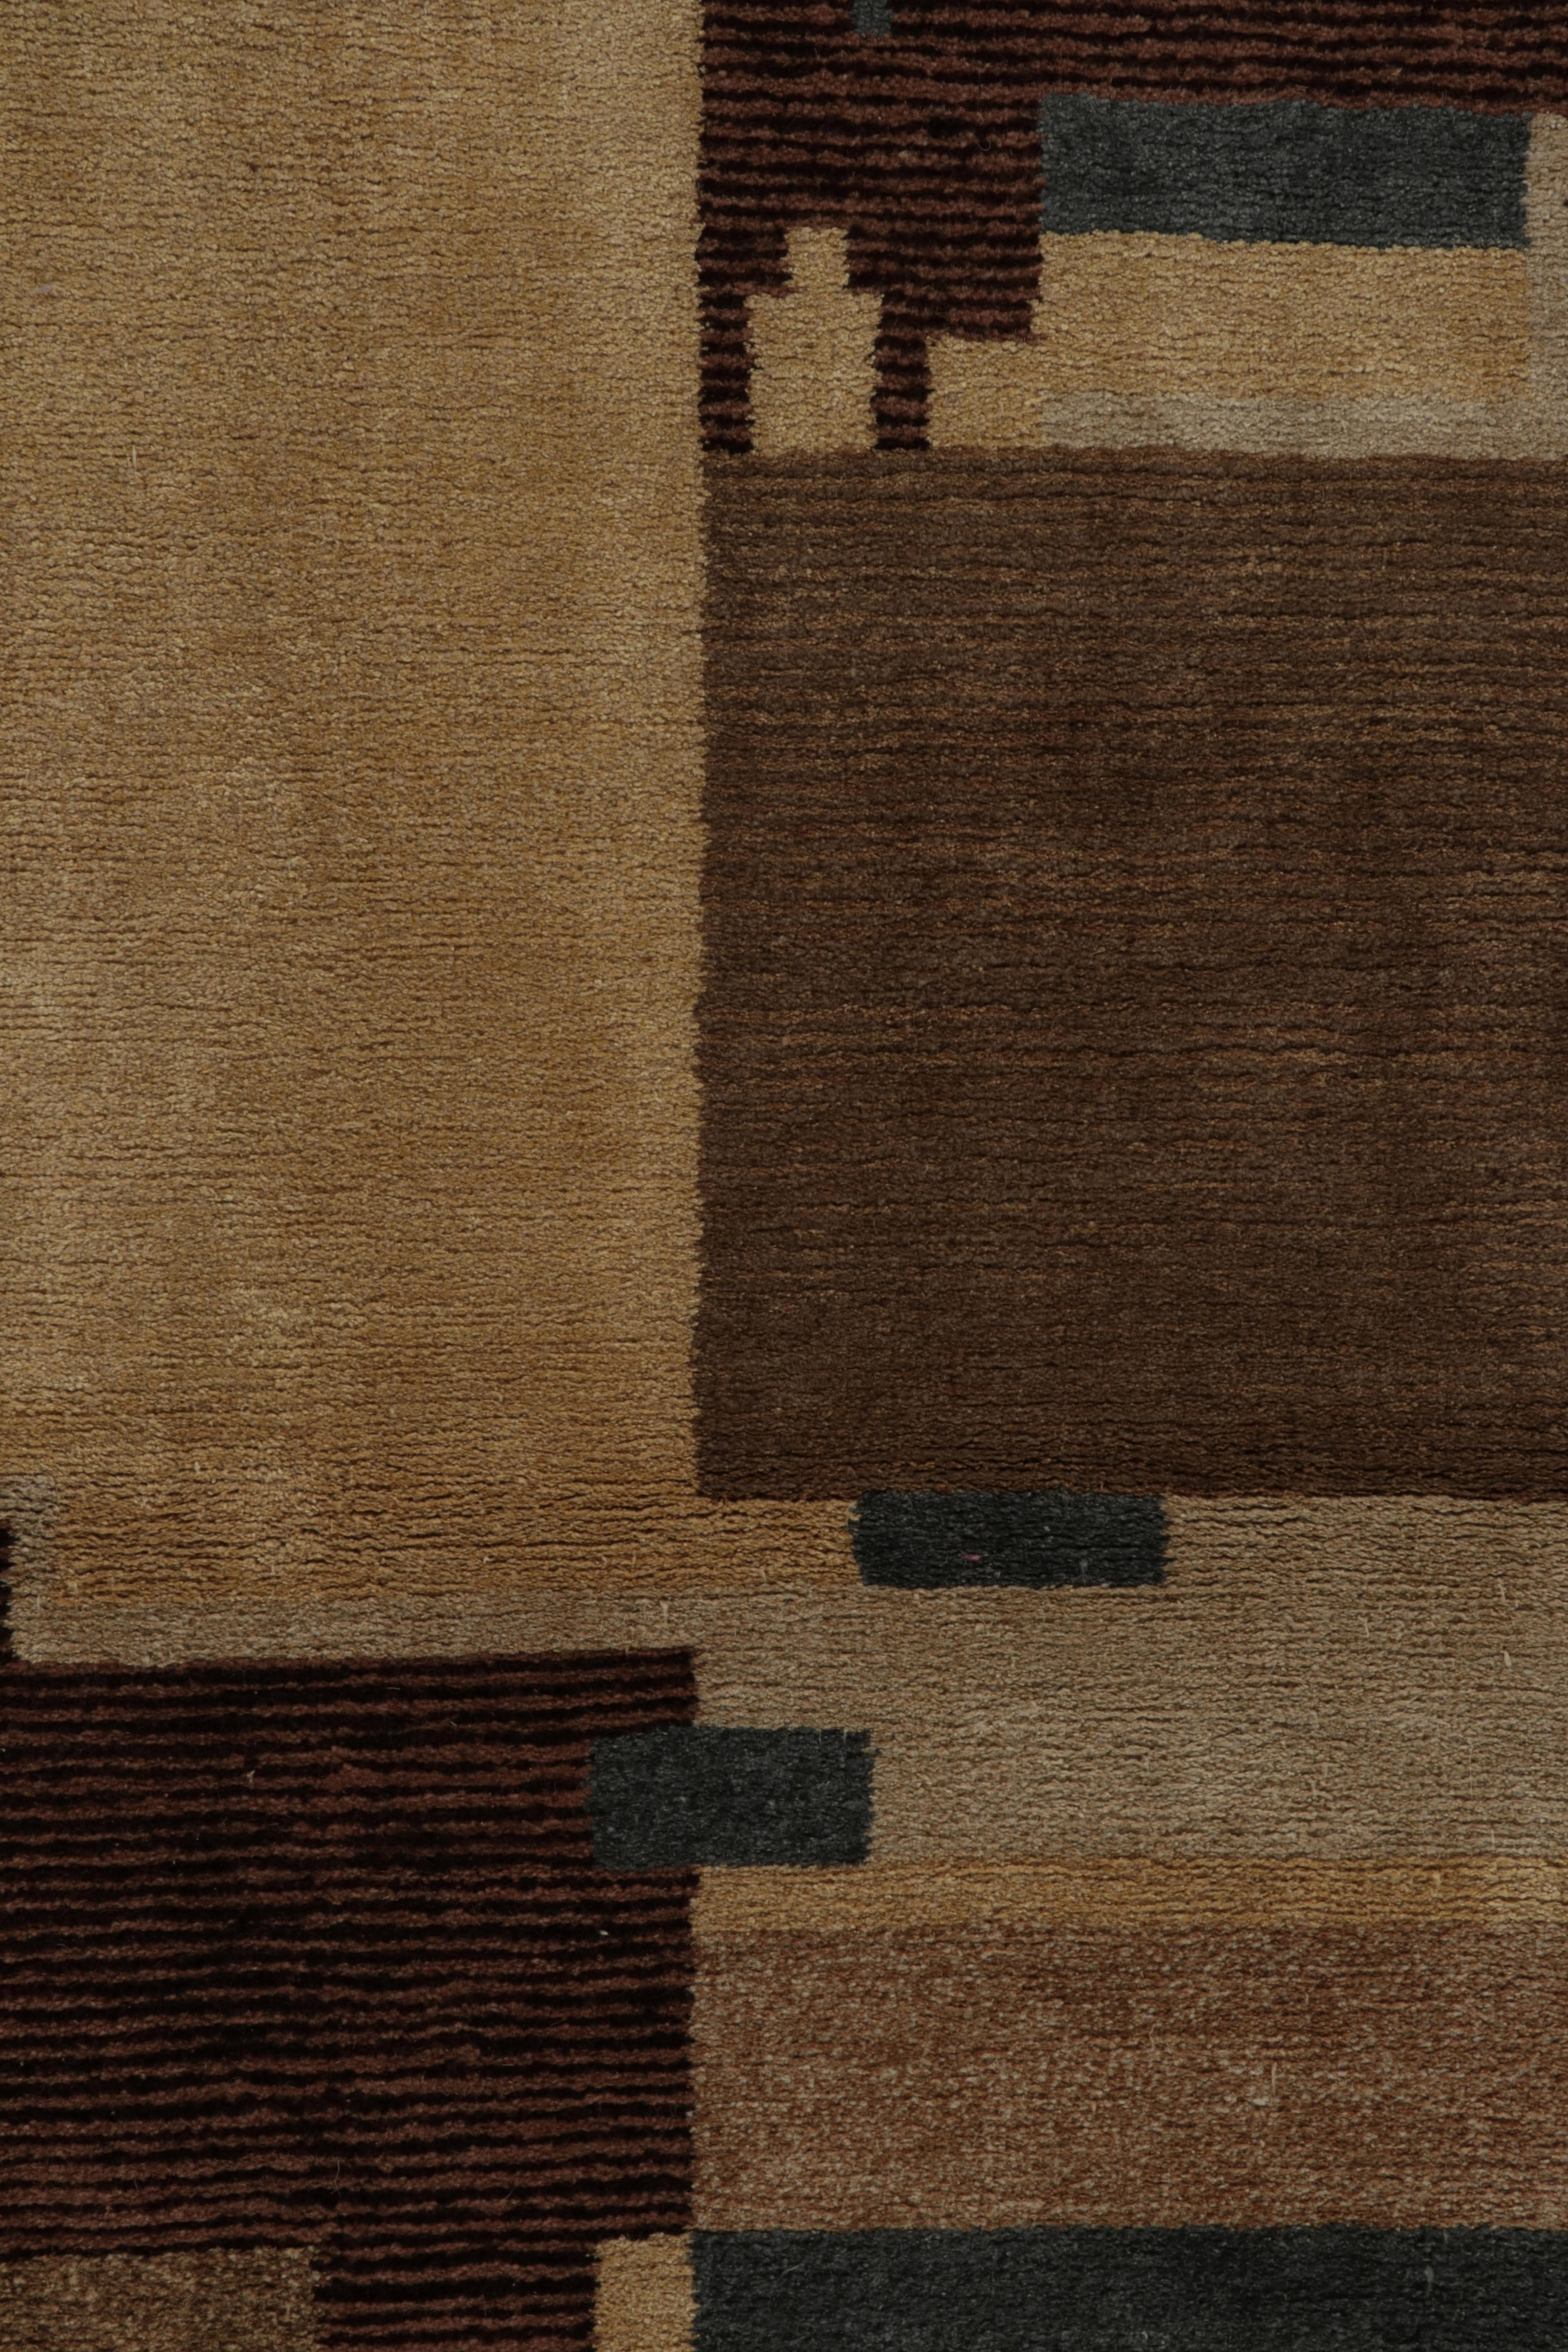 Contemporary Rug & Kilim's Hand Knotted Art Deco Rug Beige Brown Blue Cubist Pattern For Sale